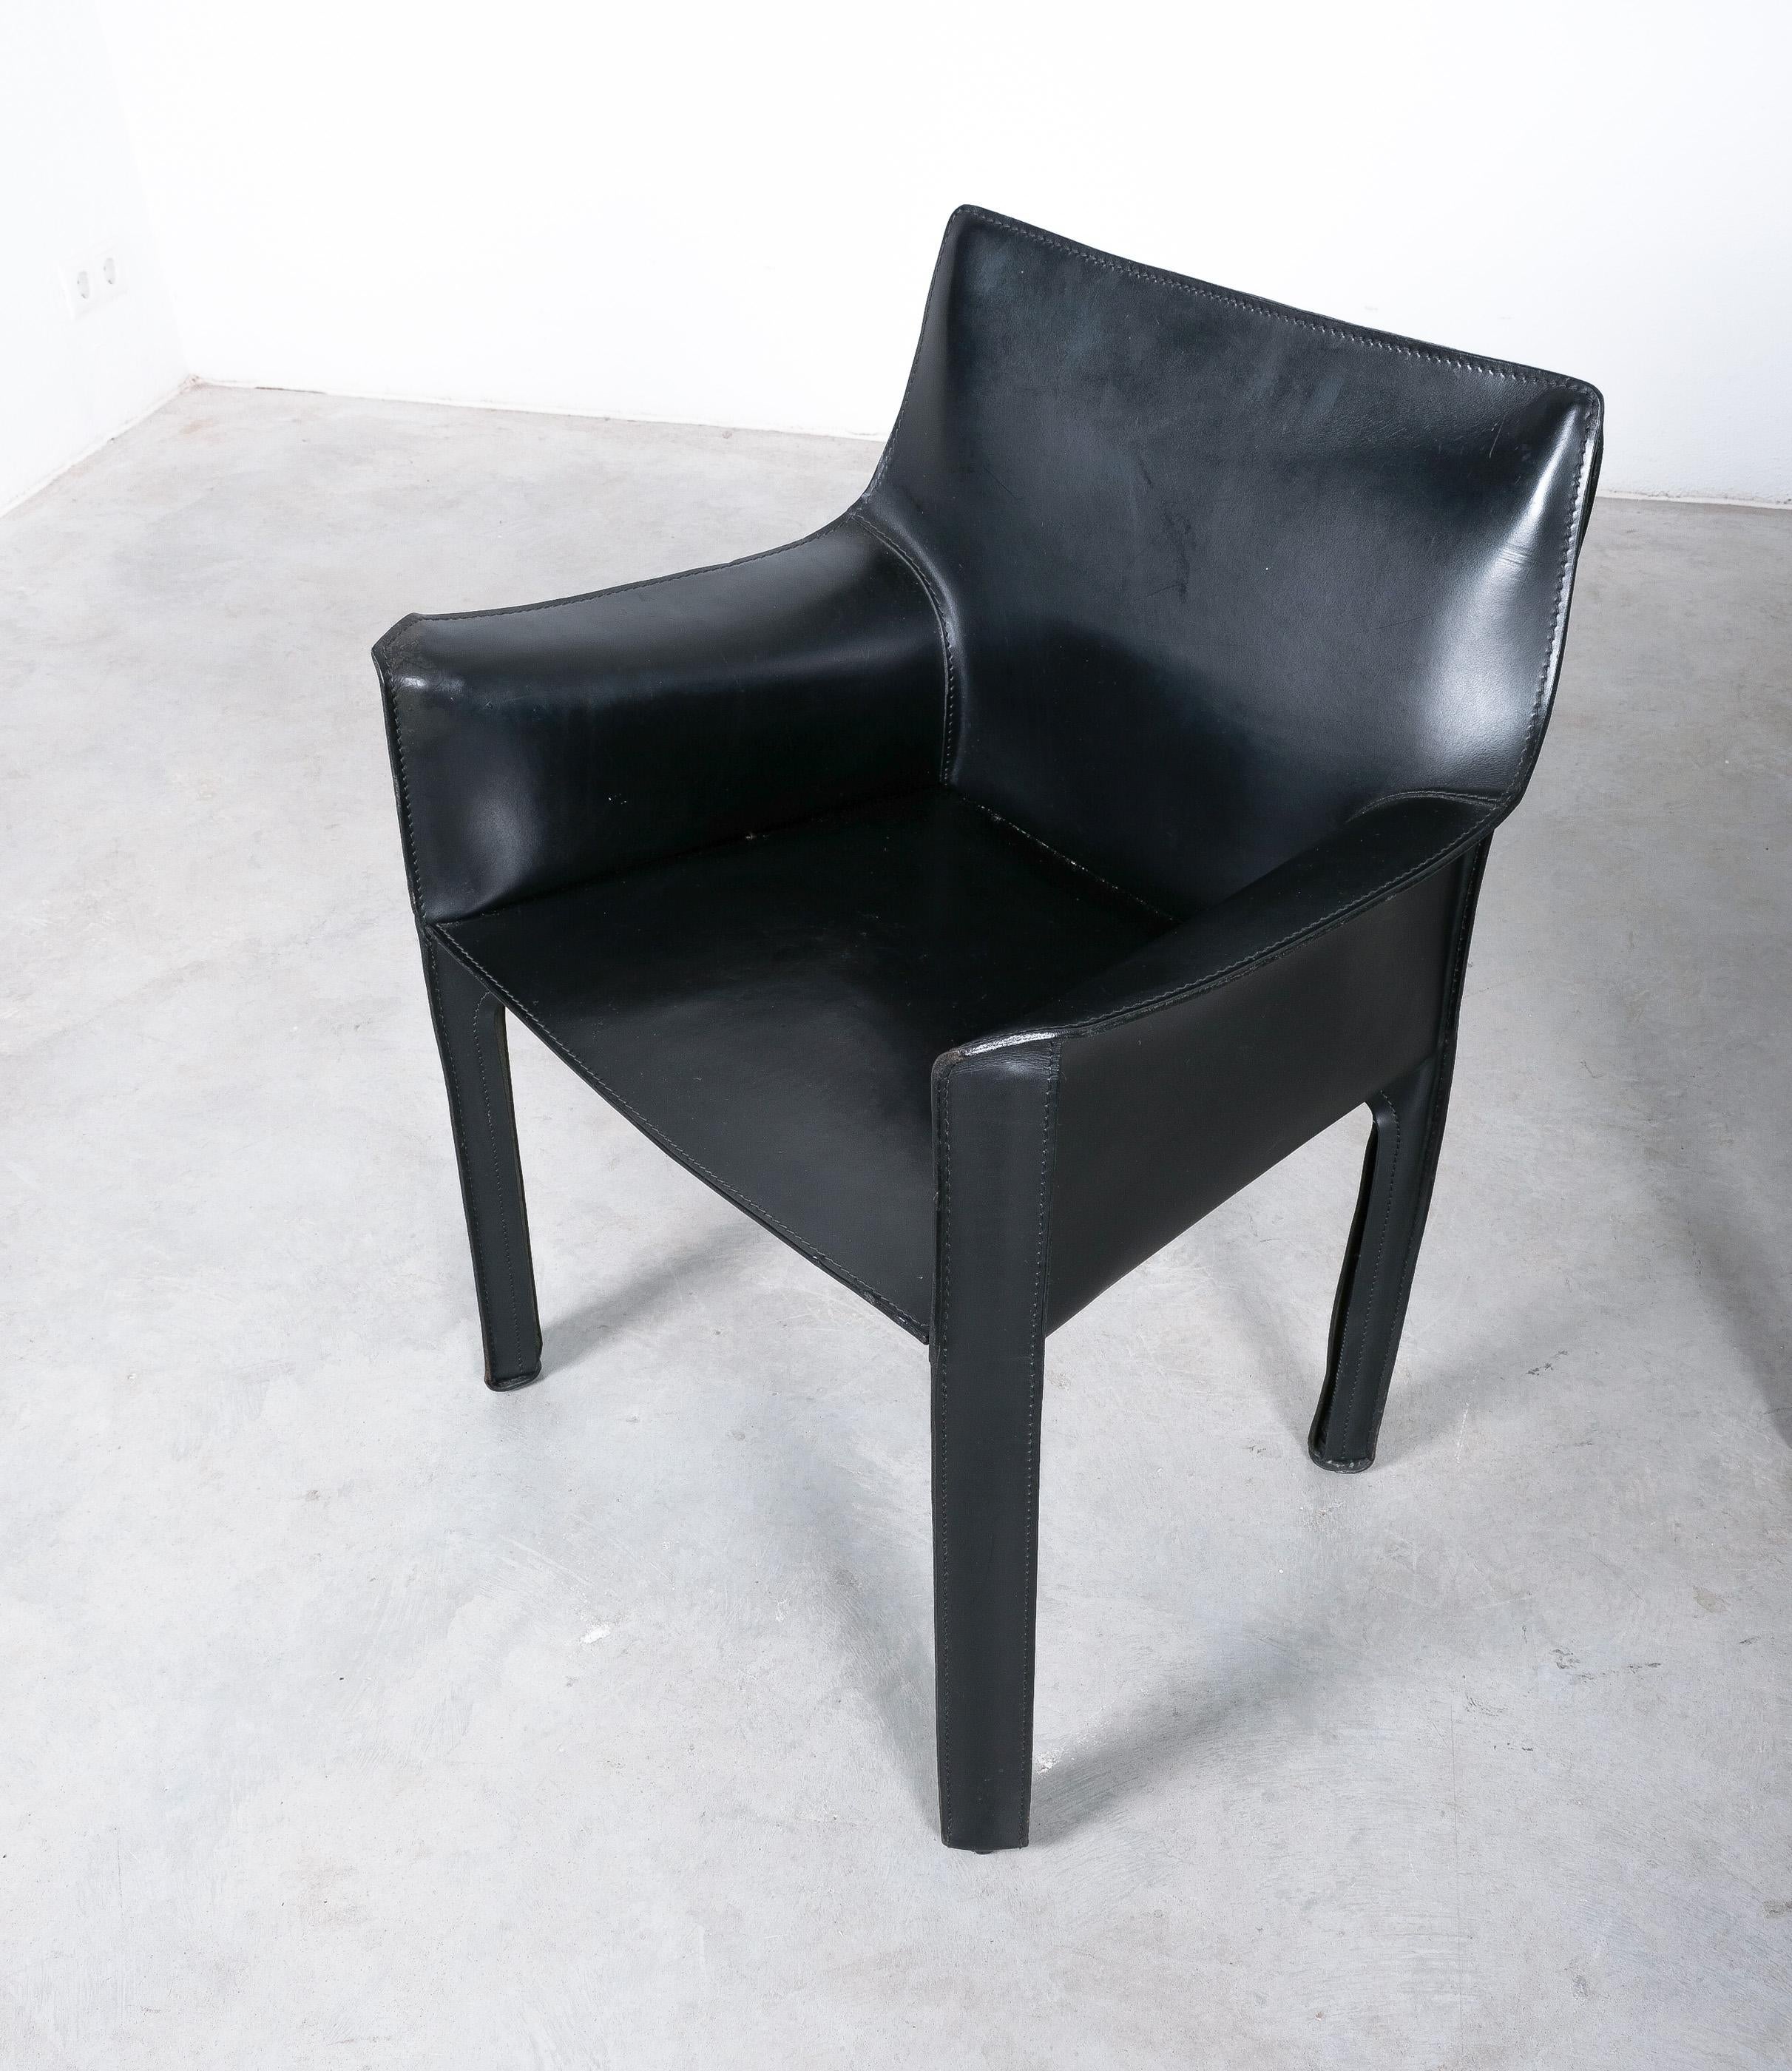 Late 20th Century Mario Bellini Cassina Cab 413 (6 pieces available) Leather Dining Chairs, Italy